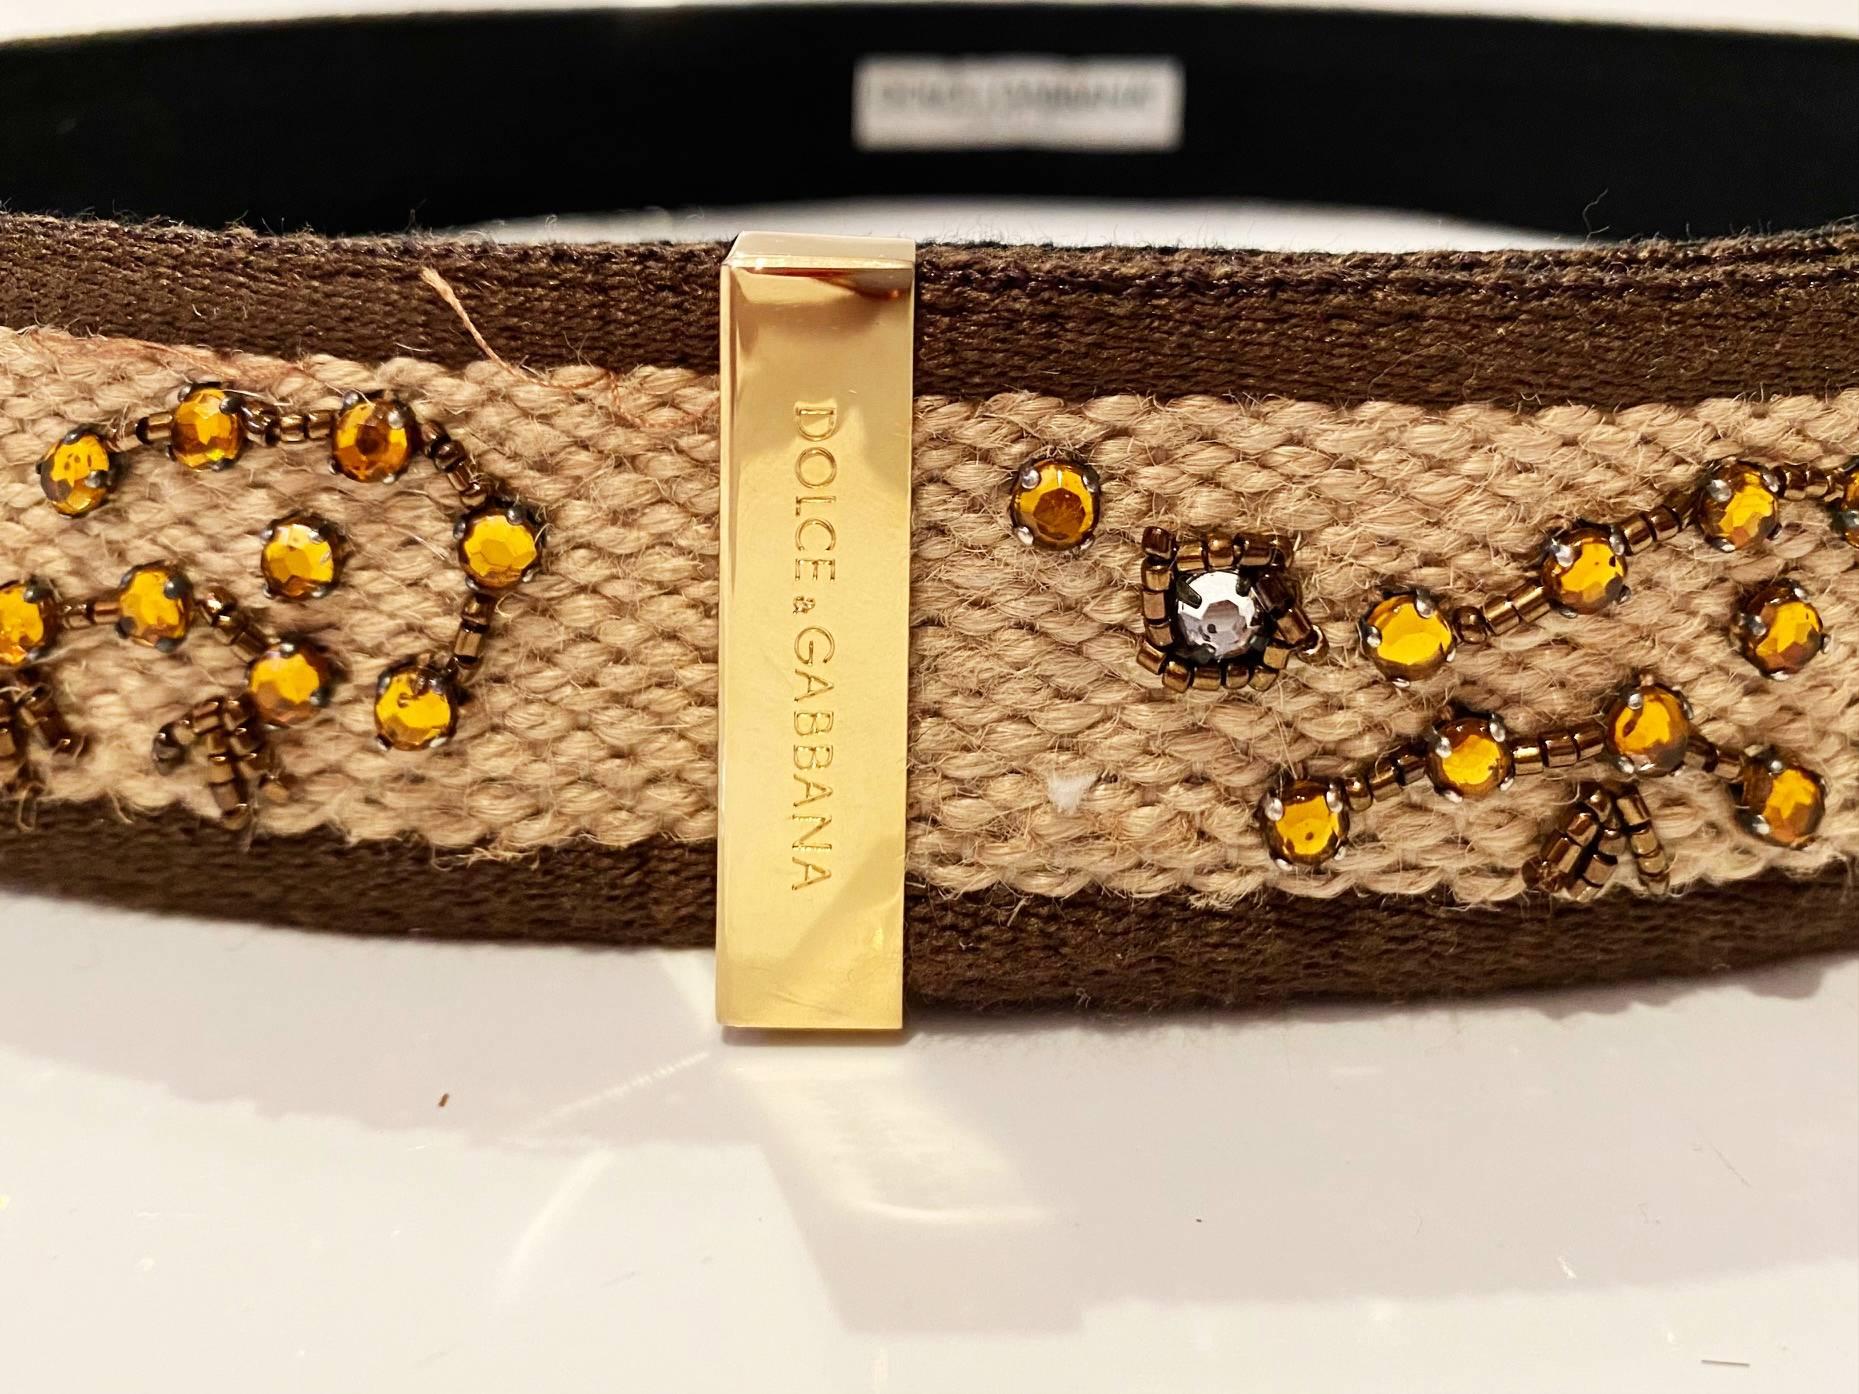 Dolce & Gabbana brown belt in cord with rhinestone details, Velcro closure with gold tone metal closure, Made in Italy  The high-quality Italian craftmanship on this belt makes it a reliable wardrobe staple that won't show signs of wear and tear